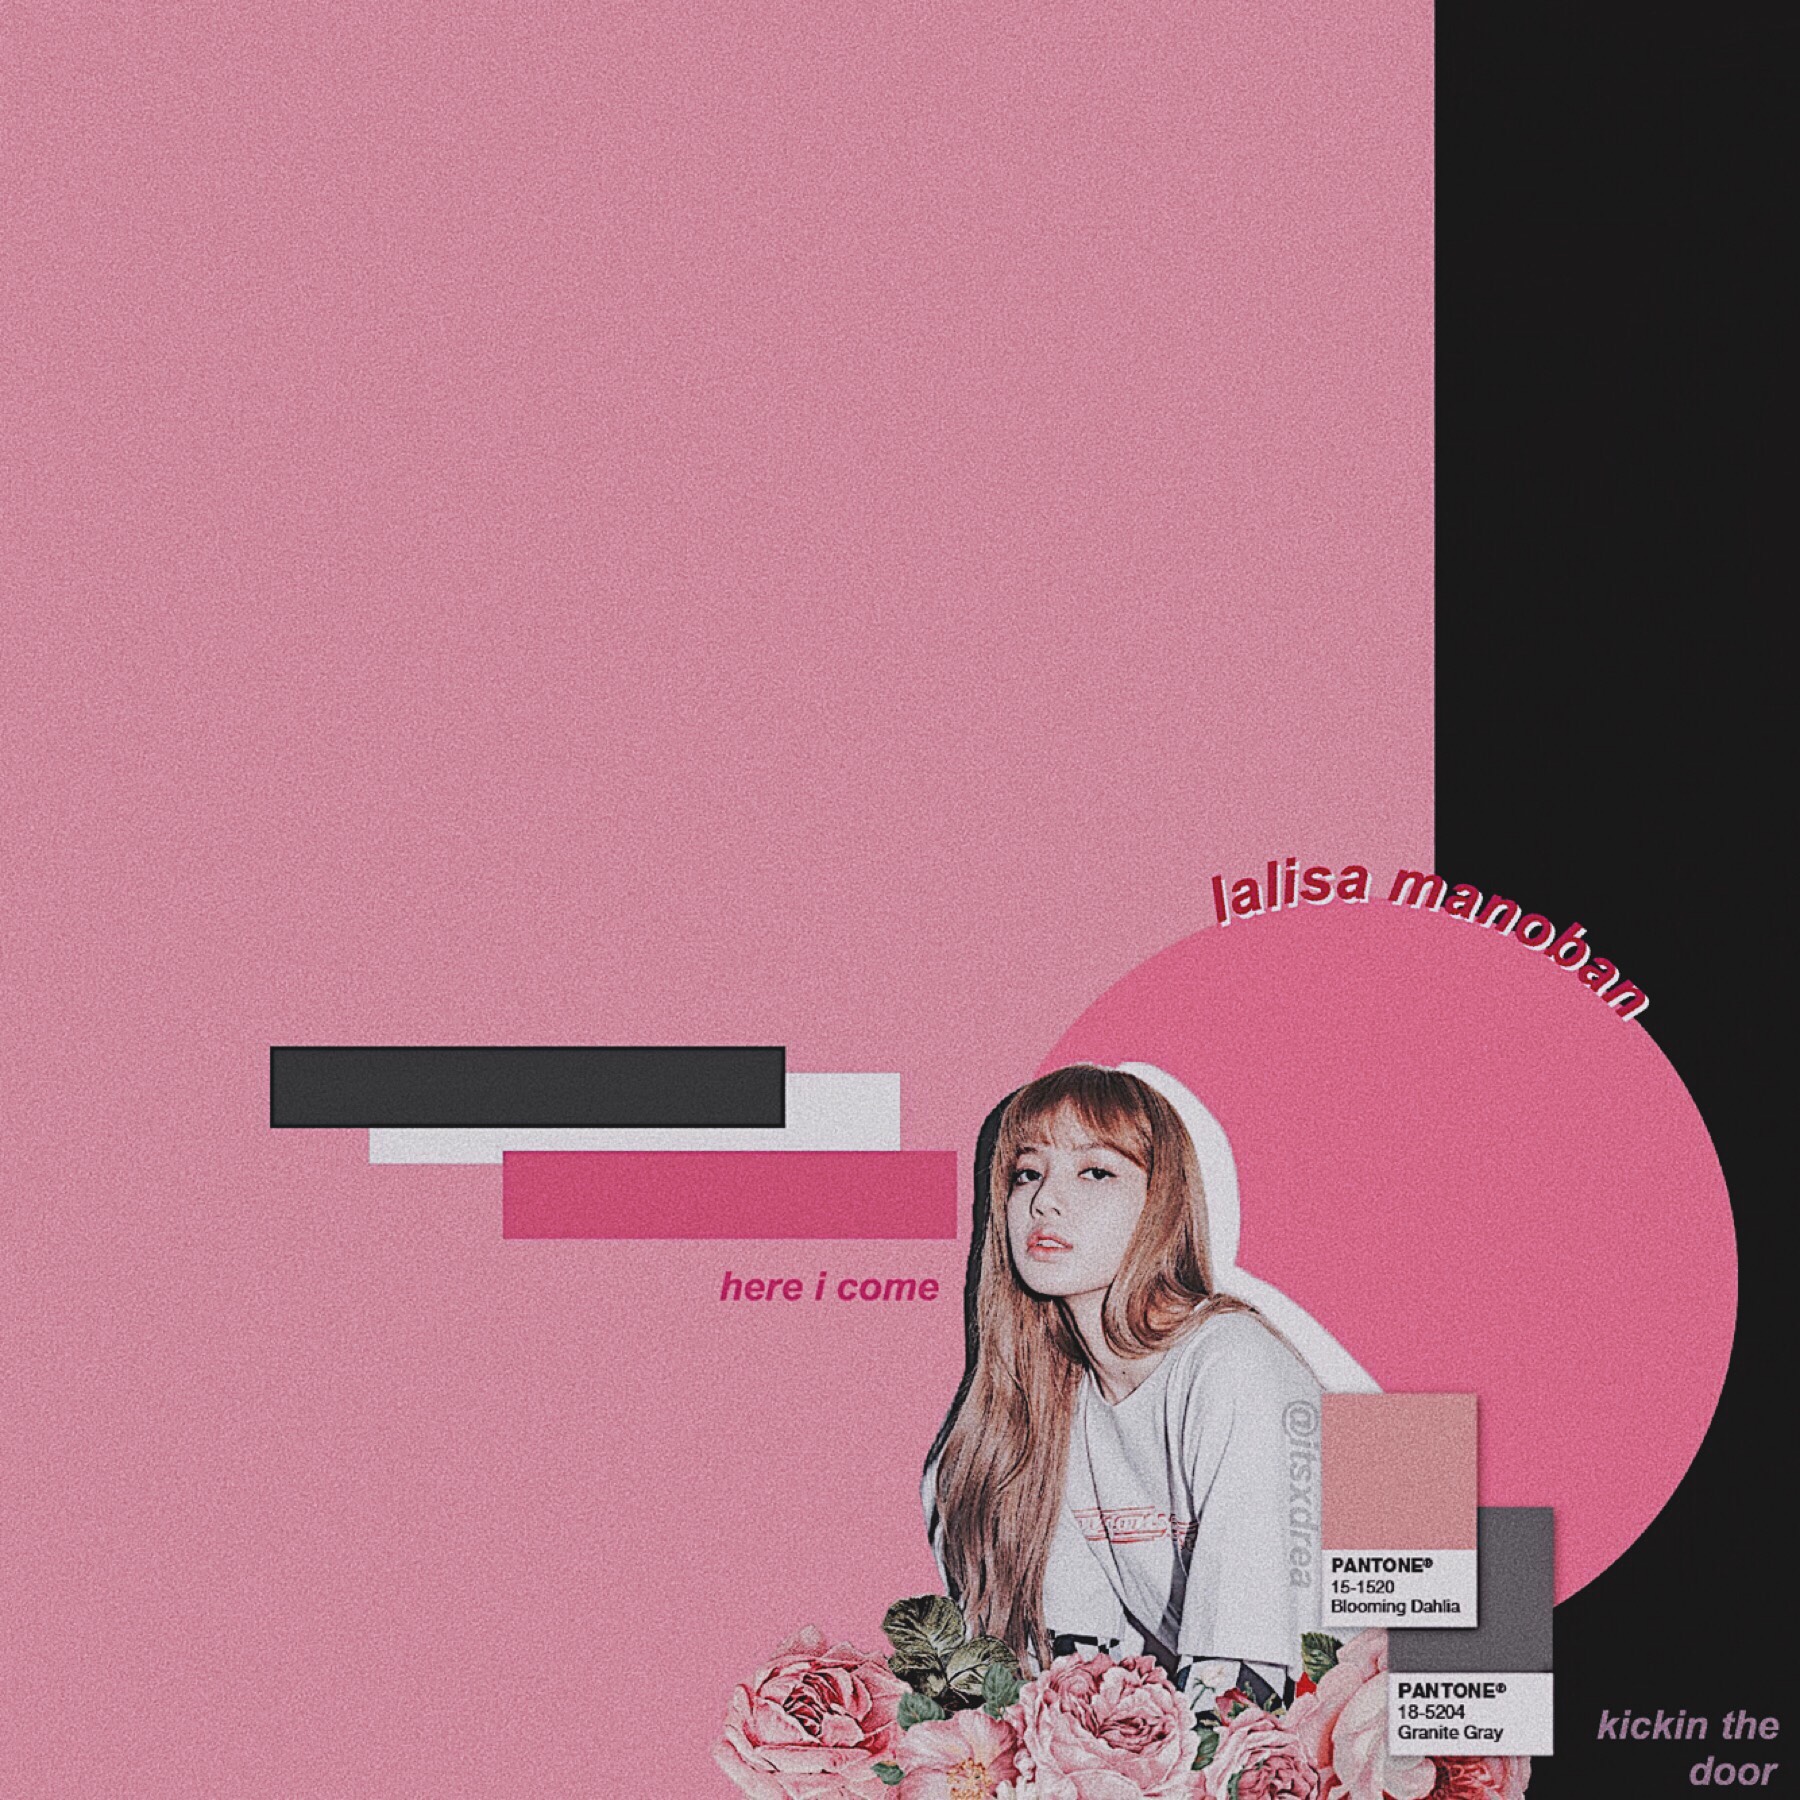 🌷
• lalisa manoban // blackpink •
> edit request for @nerd_potato4ever <
i hope you like it !! oh my- why does school have to start so soon 😭